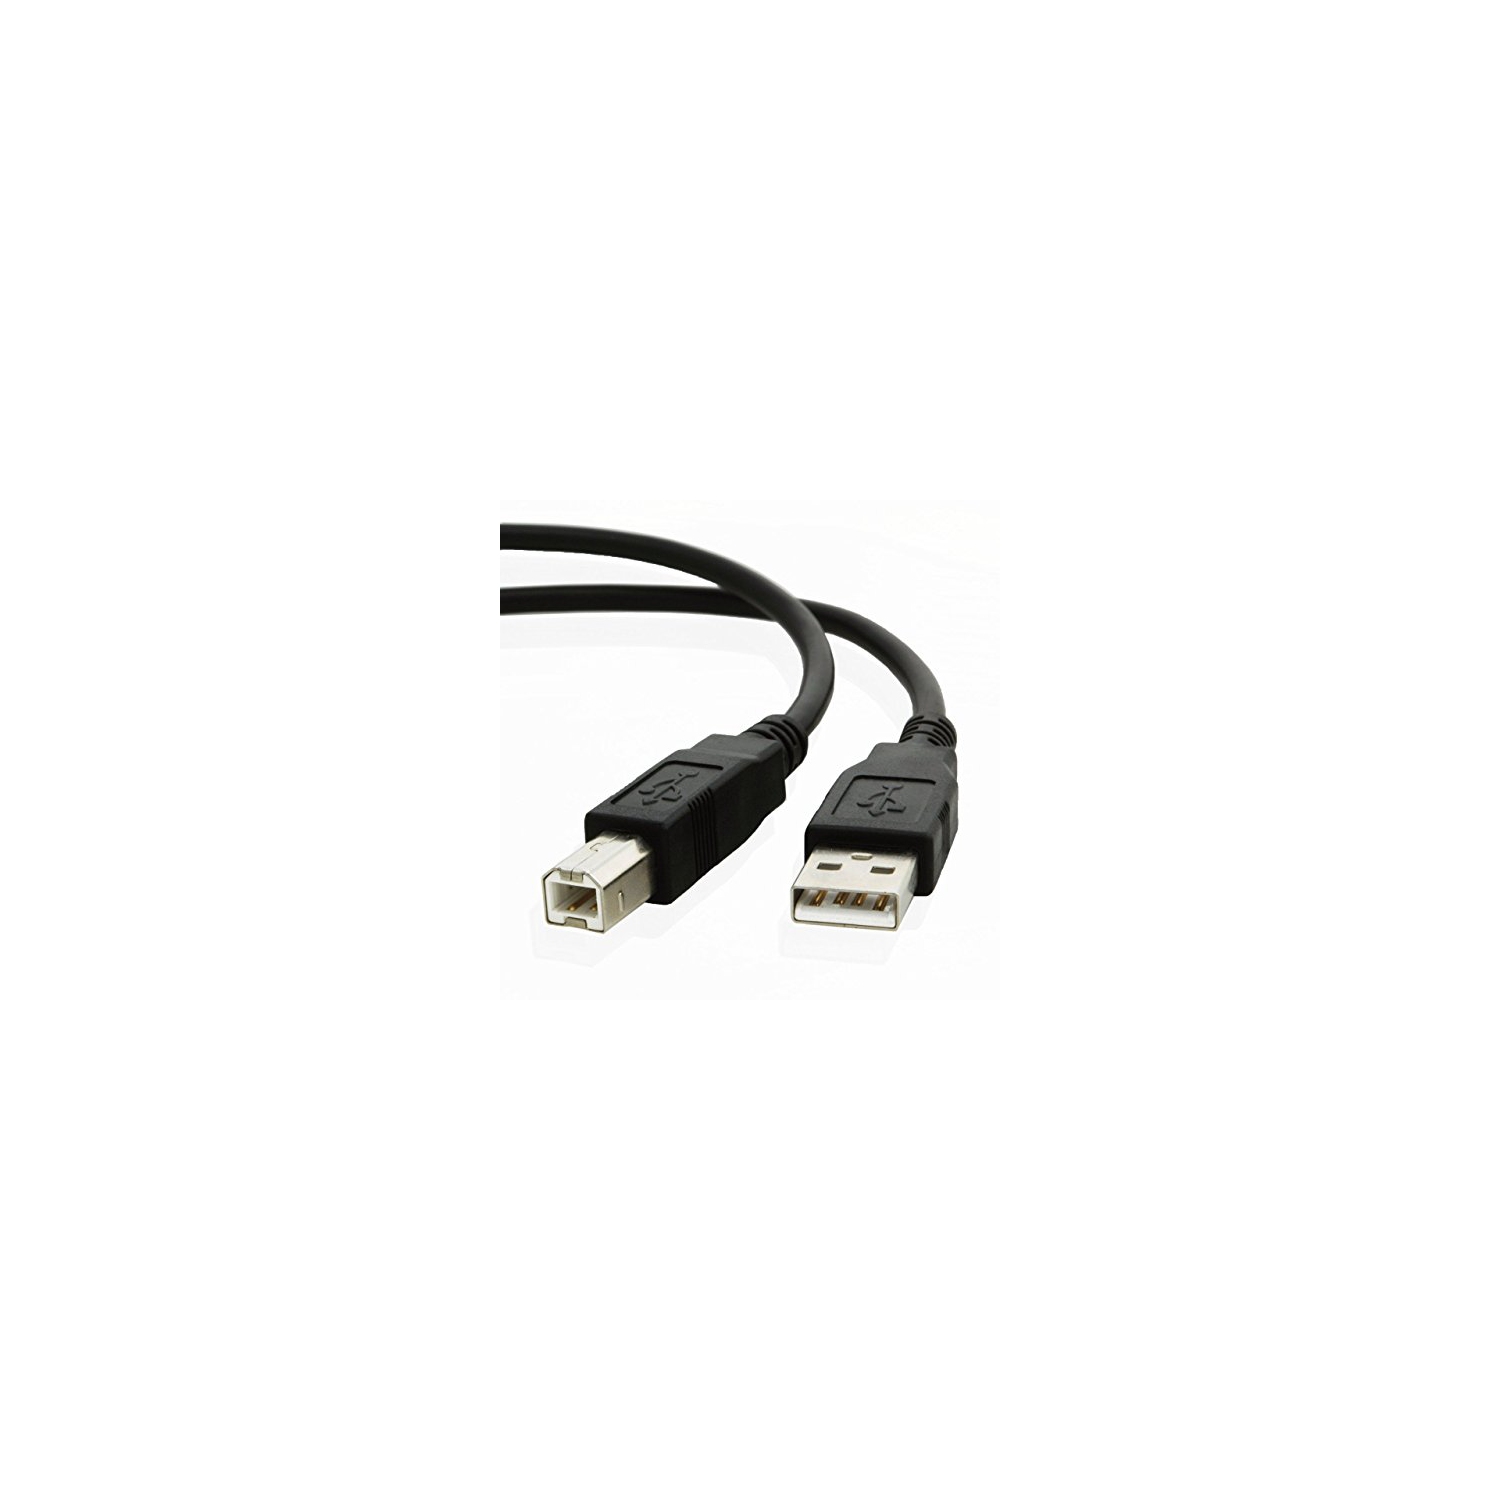 6ft USB Cable for HP Officejet 4630 e-All-in-One Inkjet Printer